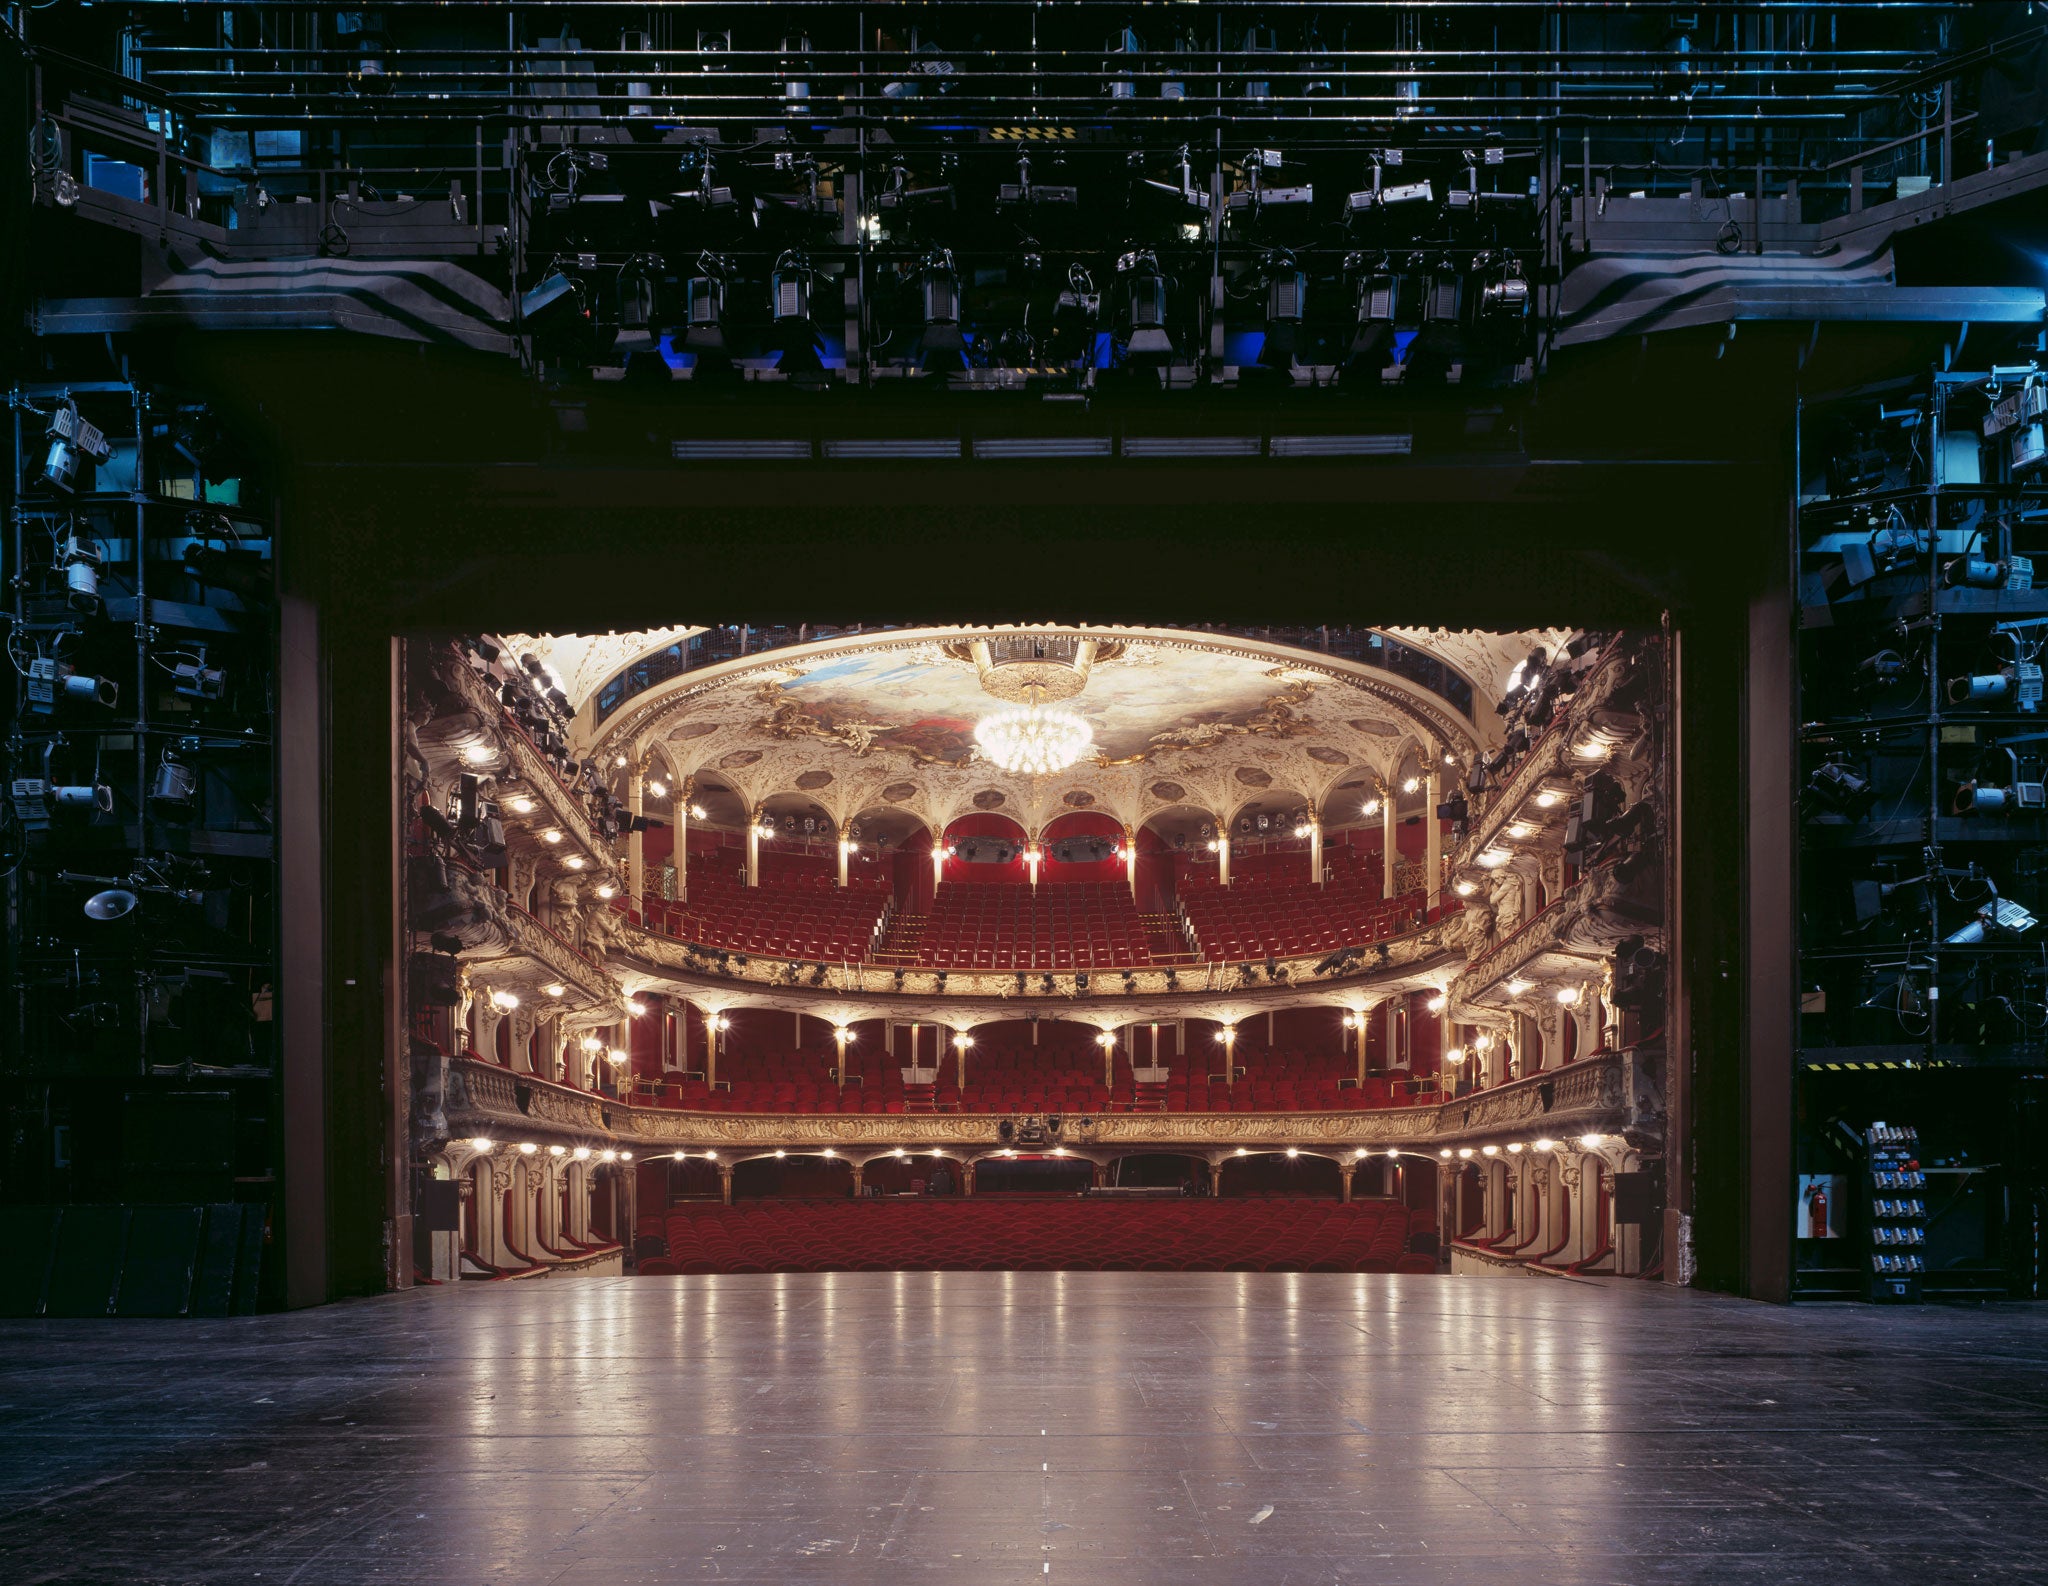 In Frahm's series of shots of theatres across his native Germany the fourth wall is very visible: it is the auditorium itself